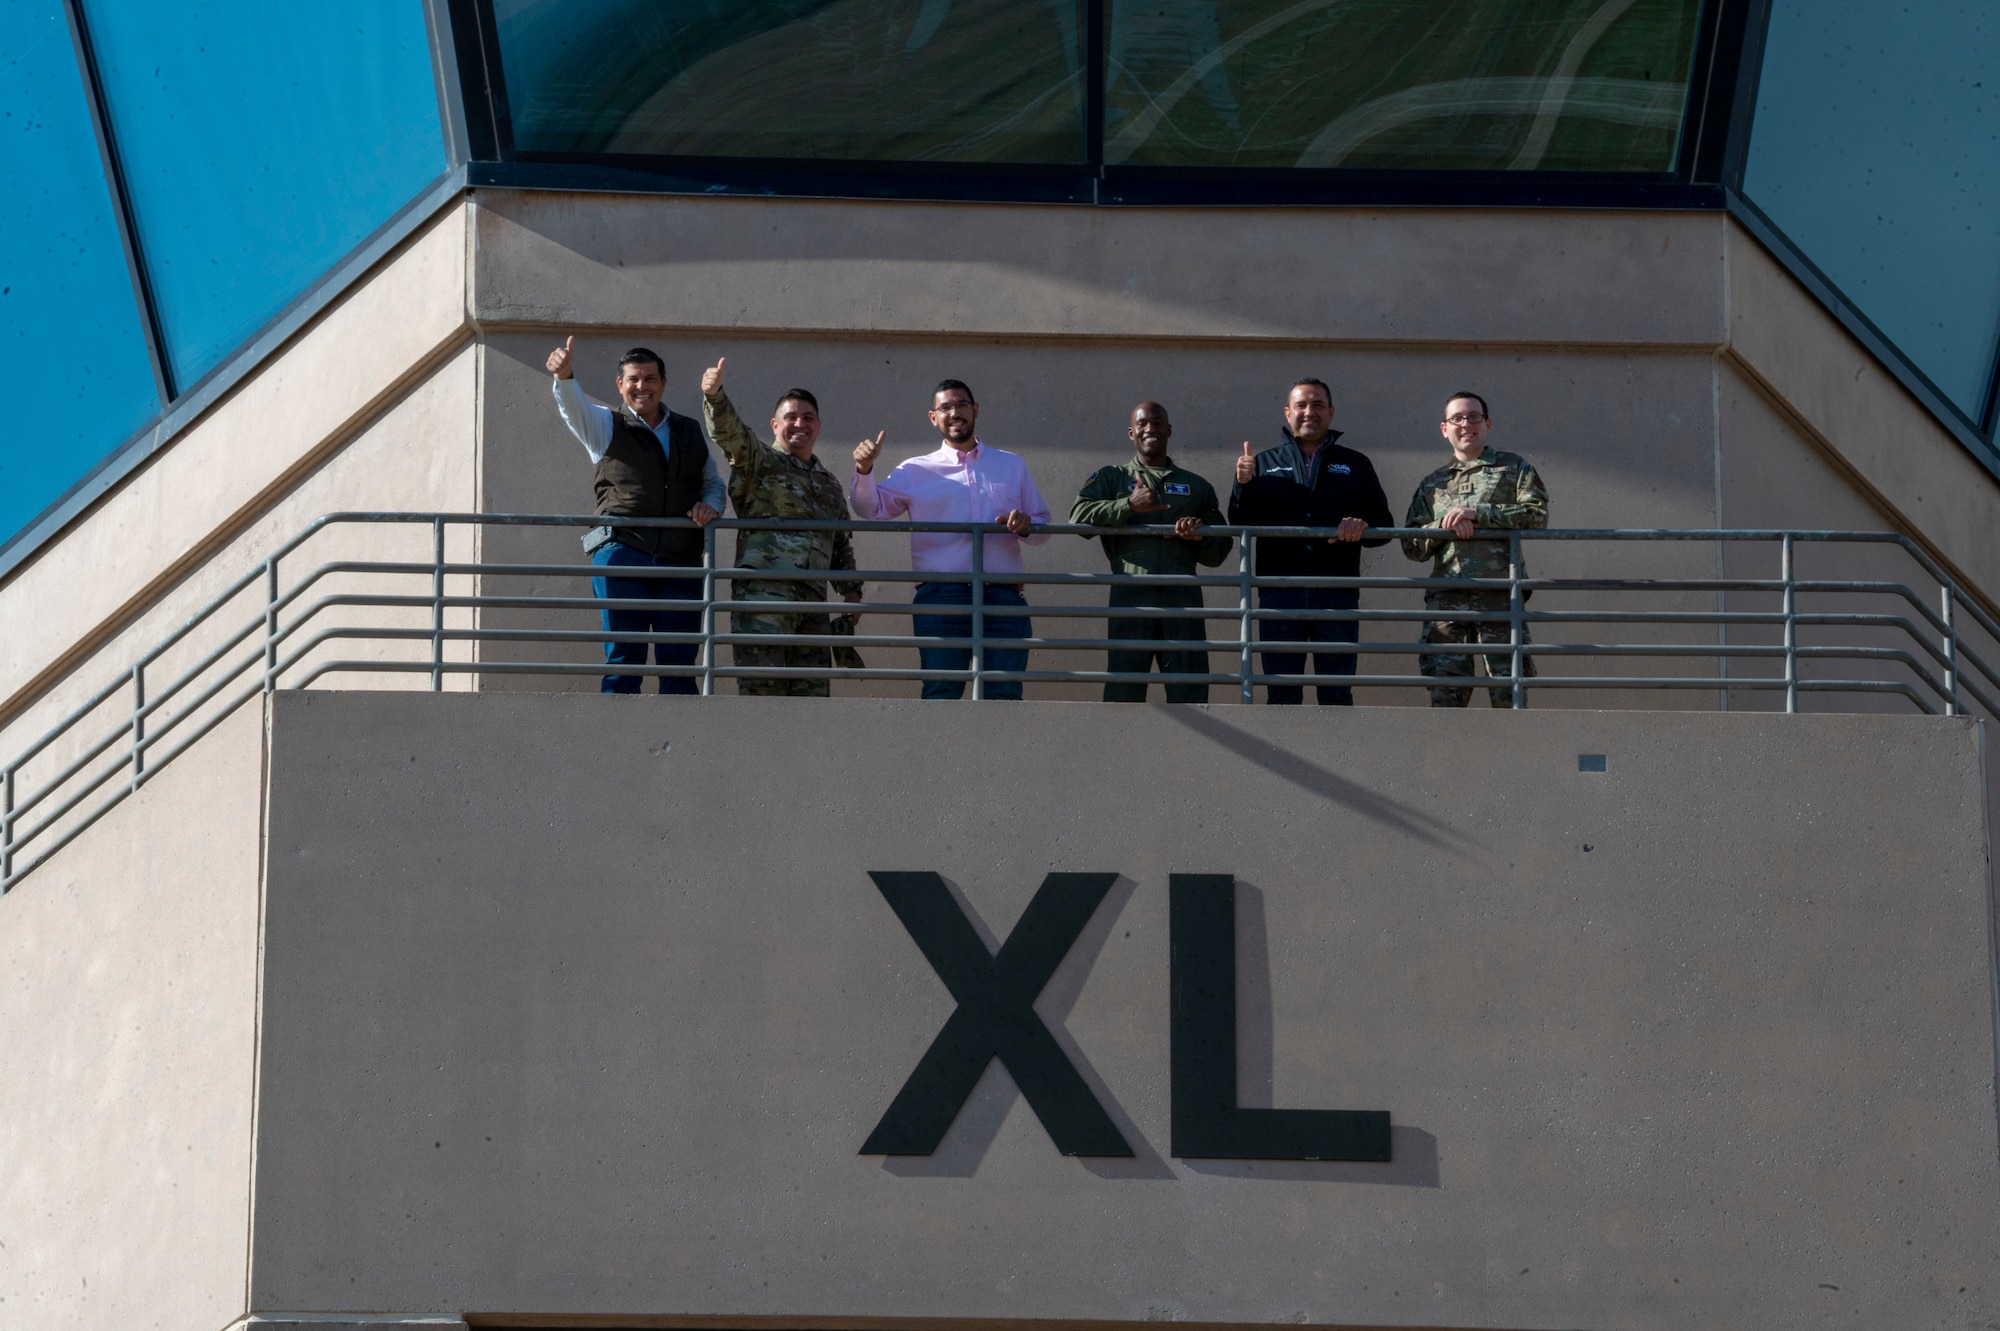 Laughlin leadership and distinguished visitors from Del Rio, Texas, and Ciudad Acuna, Mexico, from the catwalk of the Air Traffic Control Tower at Laughlin Air Force Base, Texas, Nov. 1, 2022. Laughlin’s mission is to develop U.S. Air Force pilots and the base relies on support from the local community to make that mission a success. Familiarization tours cultivate understating of the wing’s mission and help forge lasting partnerships in the community.  (U.S. Air Force photo by Senior Airman Nicholas Larsen)